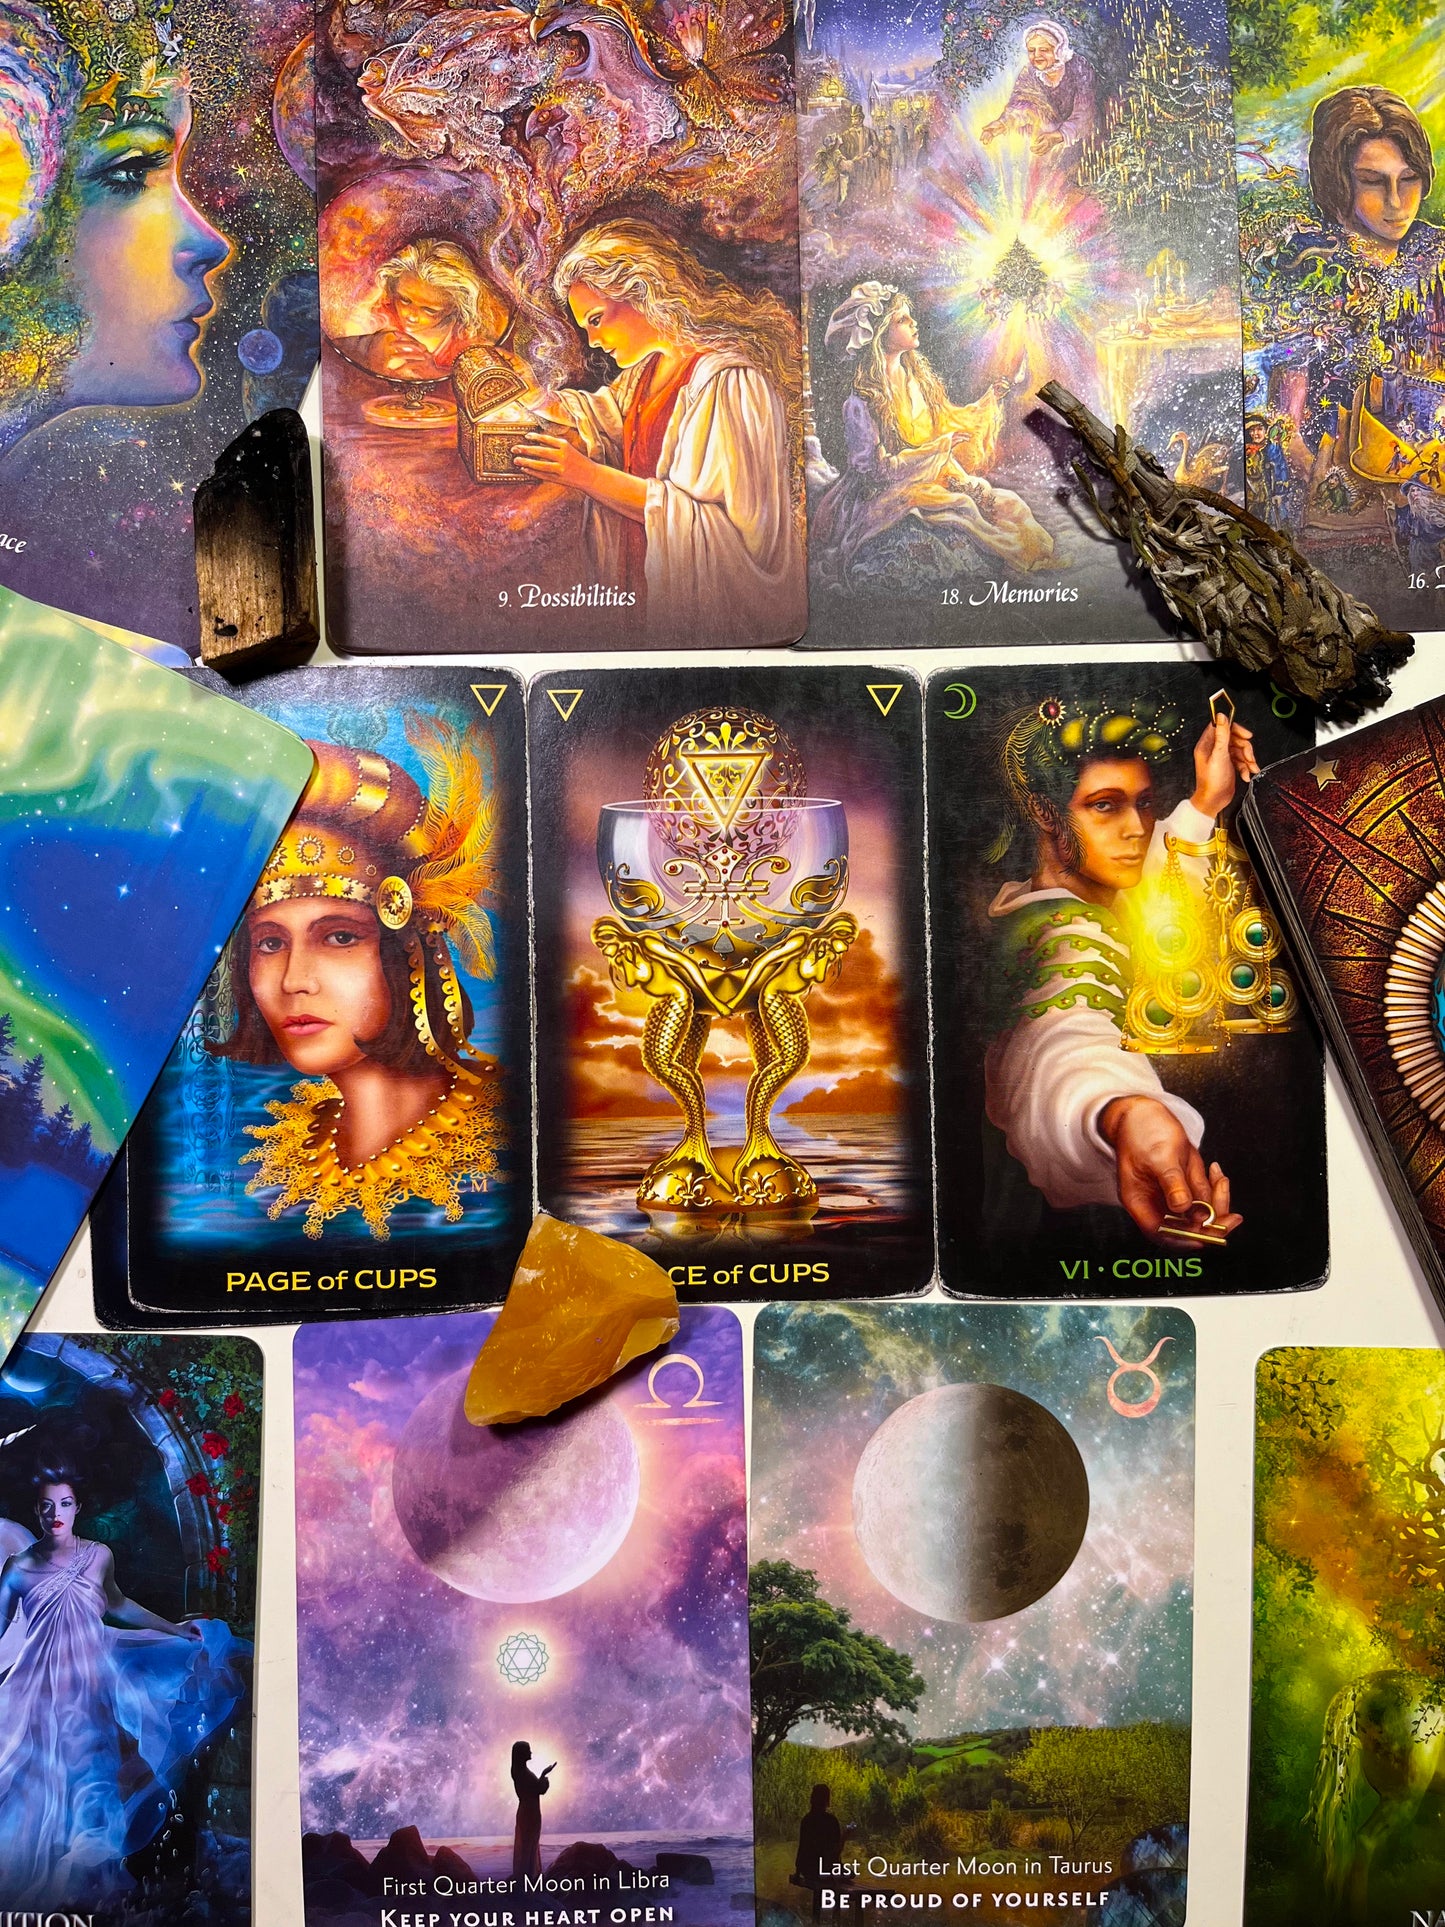 Career/Higher Purpose Tarot Reading & Oracle Manifestation ~ 30-40 minute recorded video